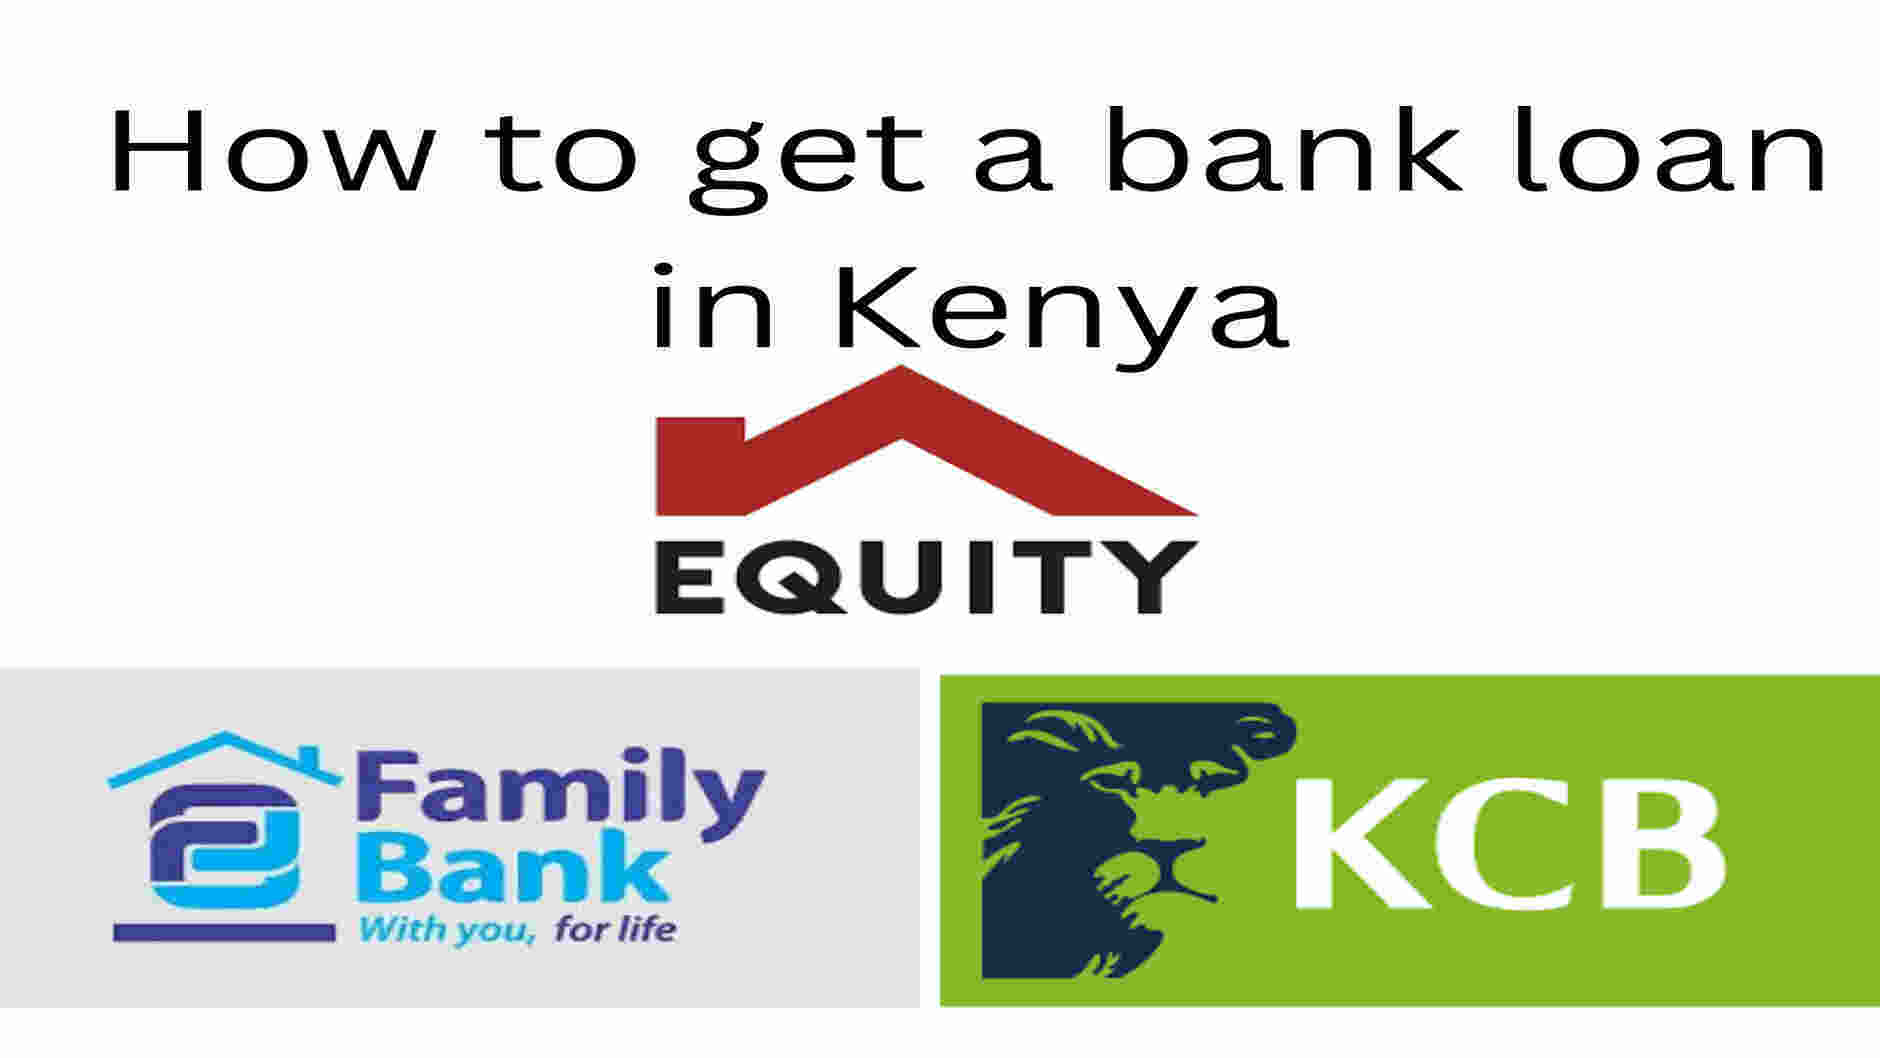 How to get a bank loan in Kenya